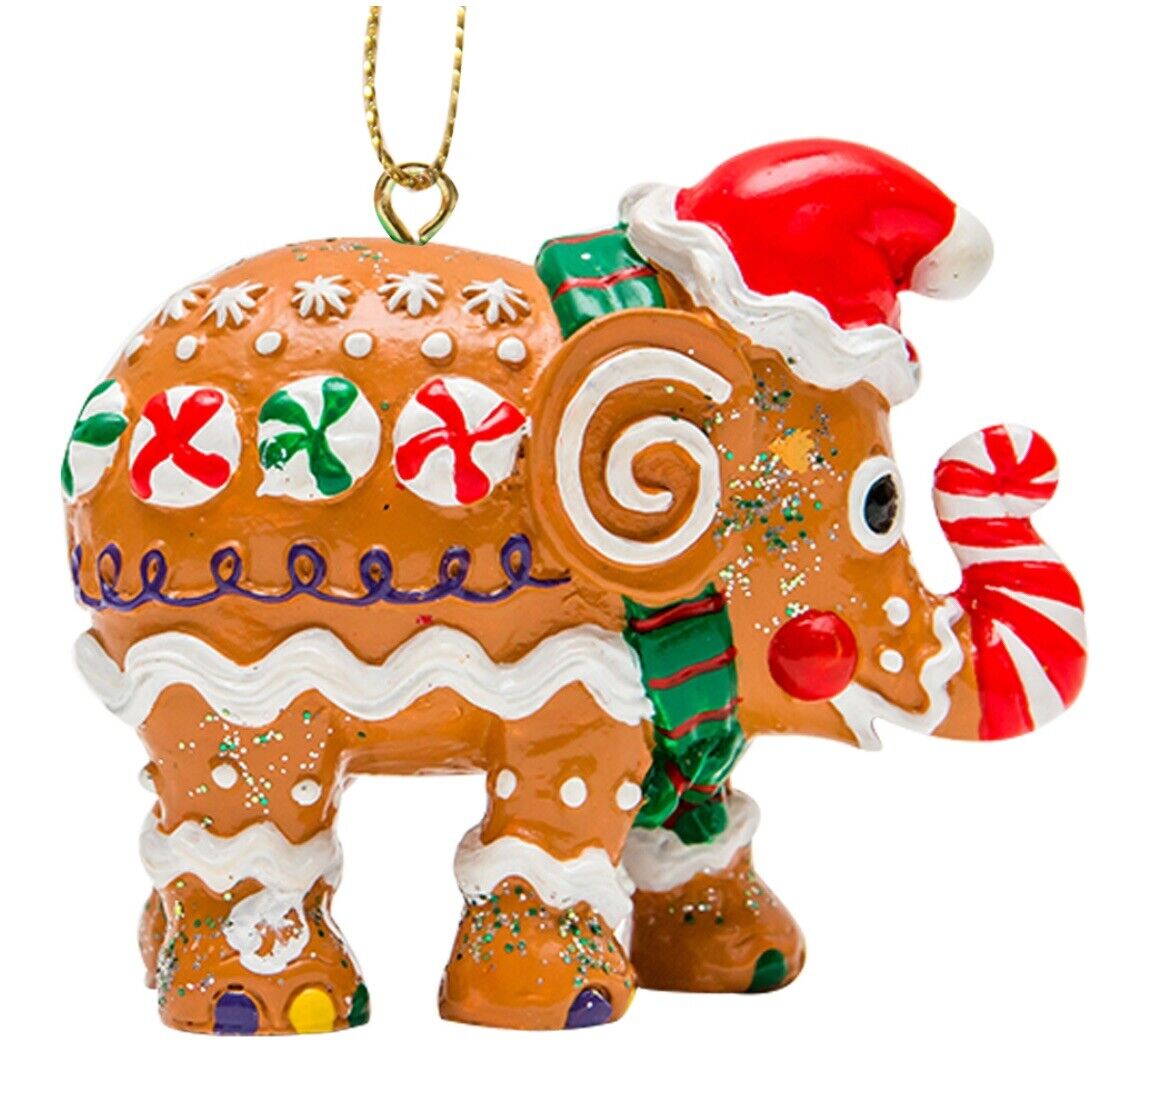 ELEPHANT PARADE Gingerphant Ornament by David Nguyen in Tin Gift Box